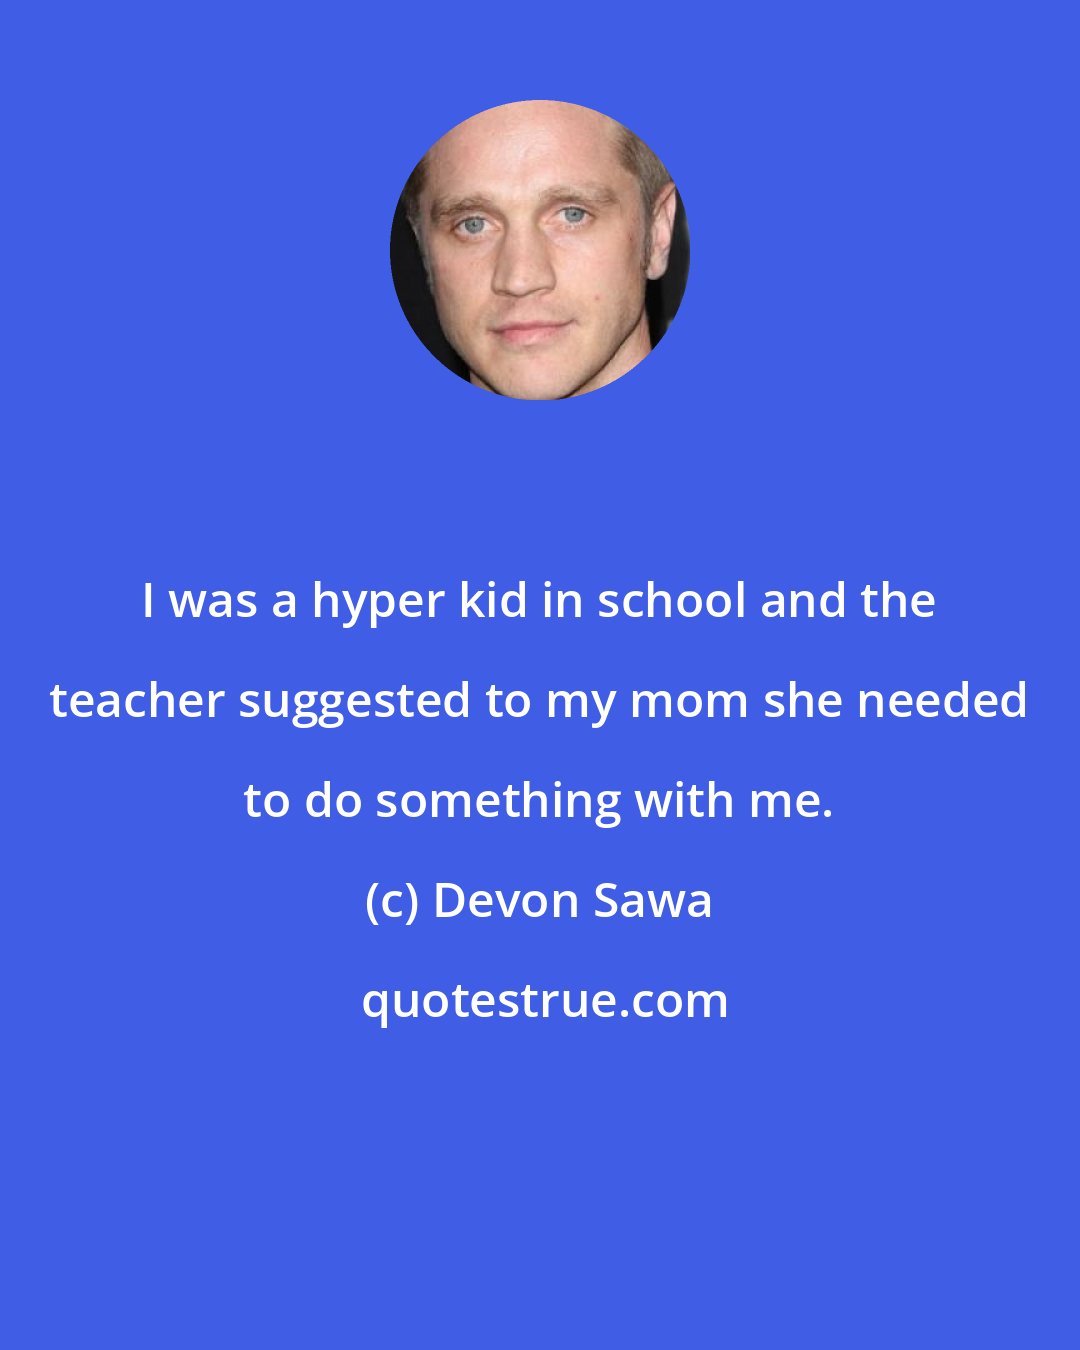 Devon Sawa: I was a hyper kid in school and the teacher suggested to my mom she needed to do something with me.